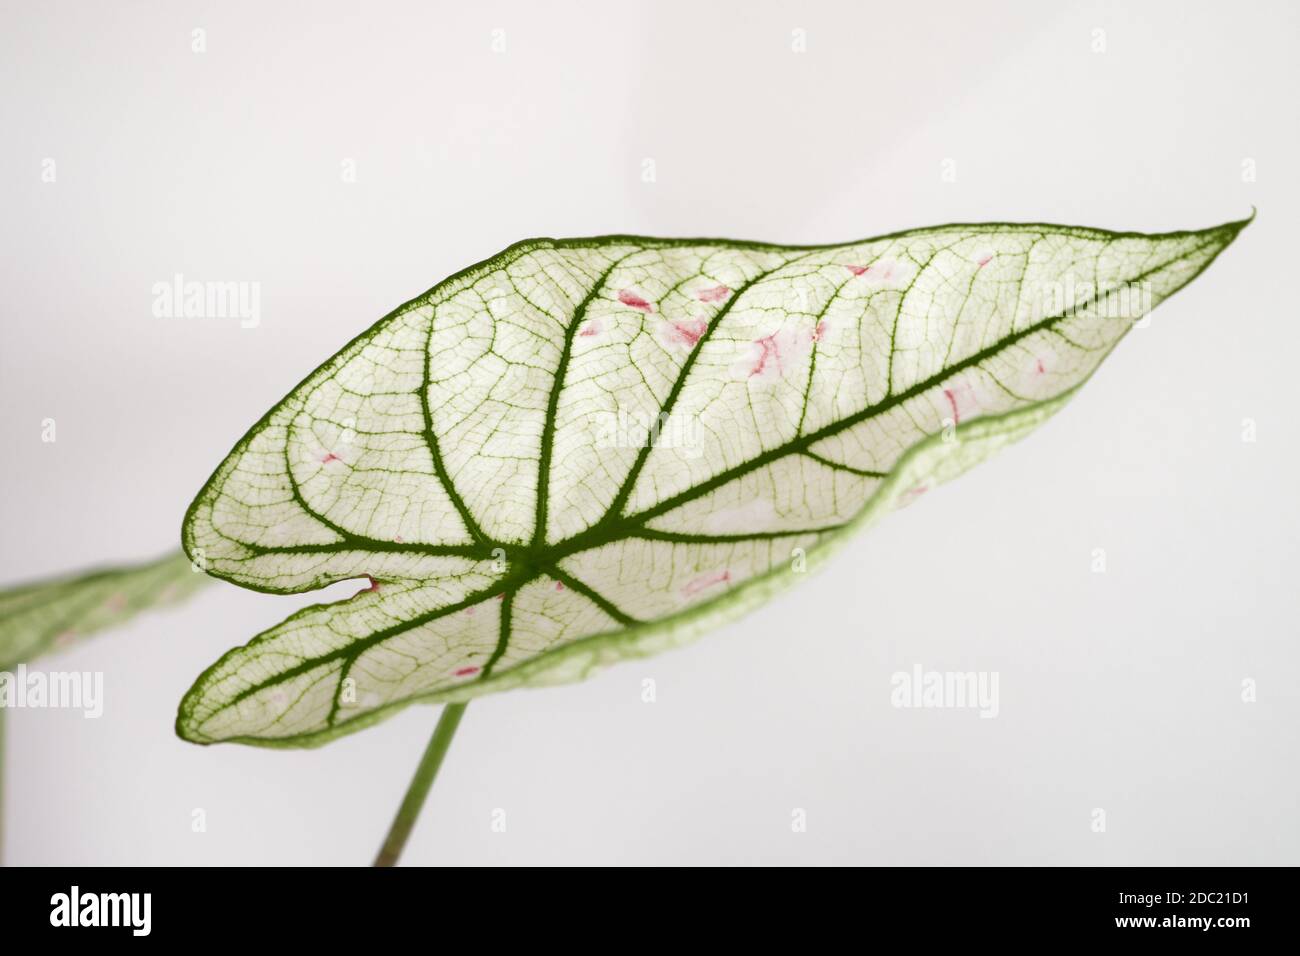 High key and close up of a caladium cranberry star. They have white leafs with pink dots and green veins. Stock Photo